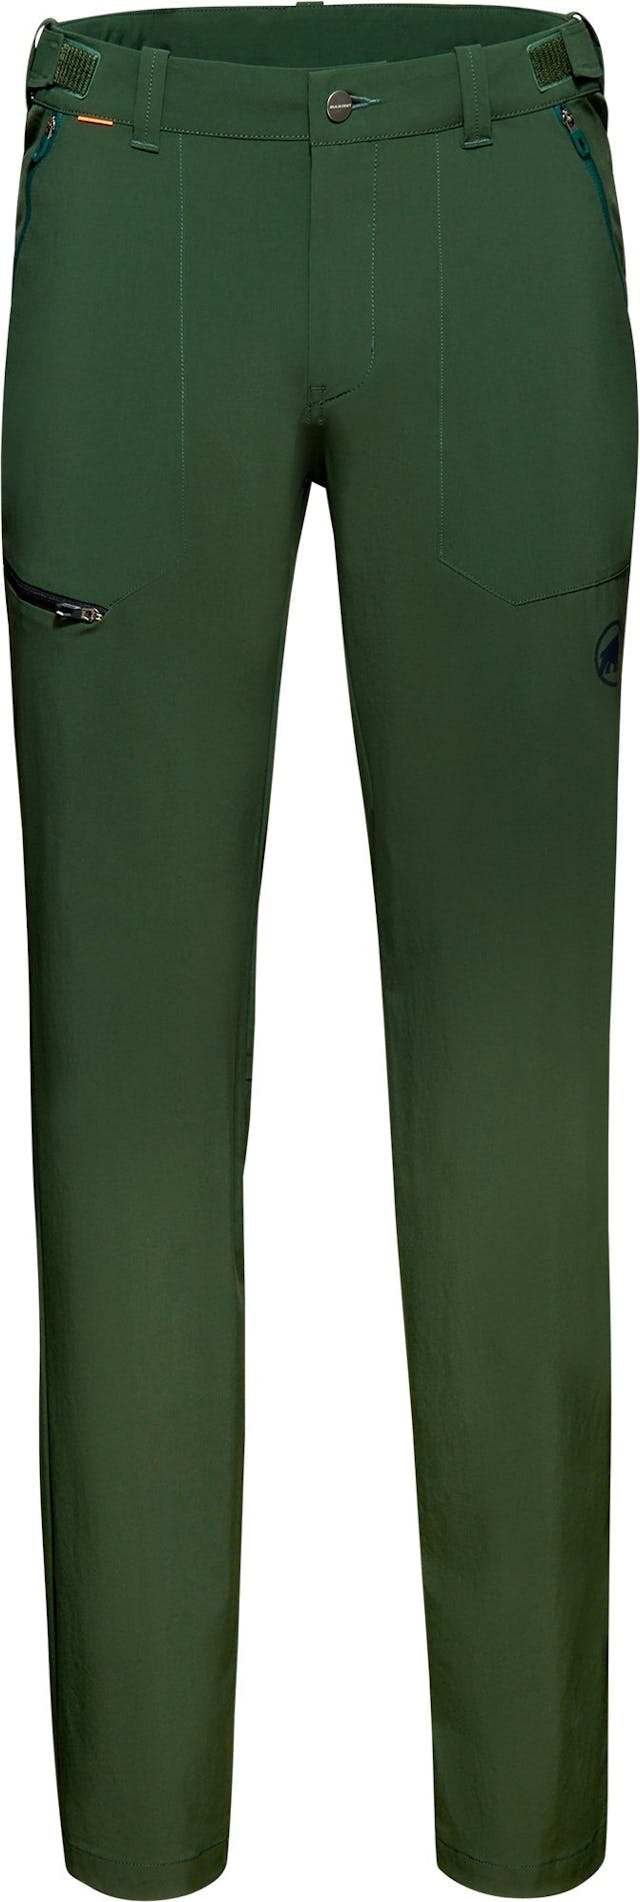 Product image for Runbold Pants - Men's